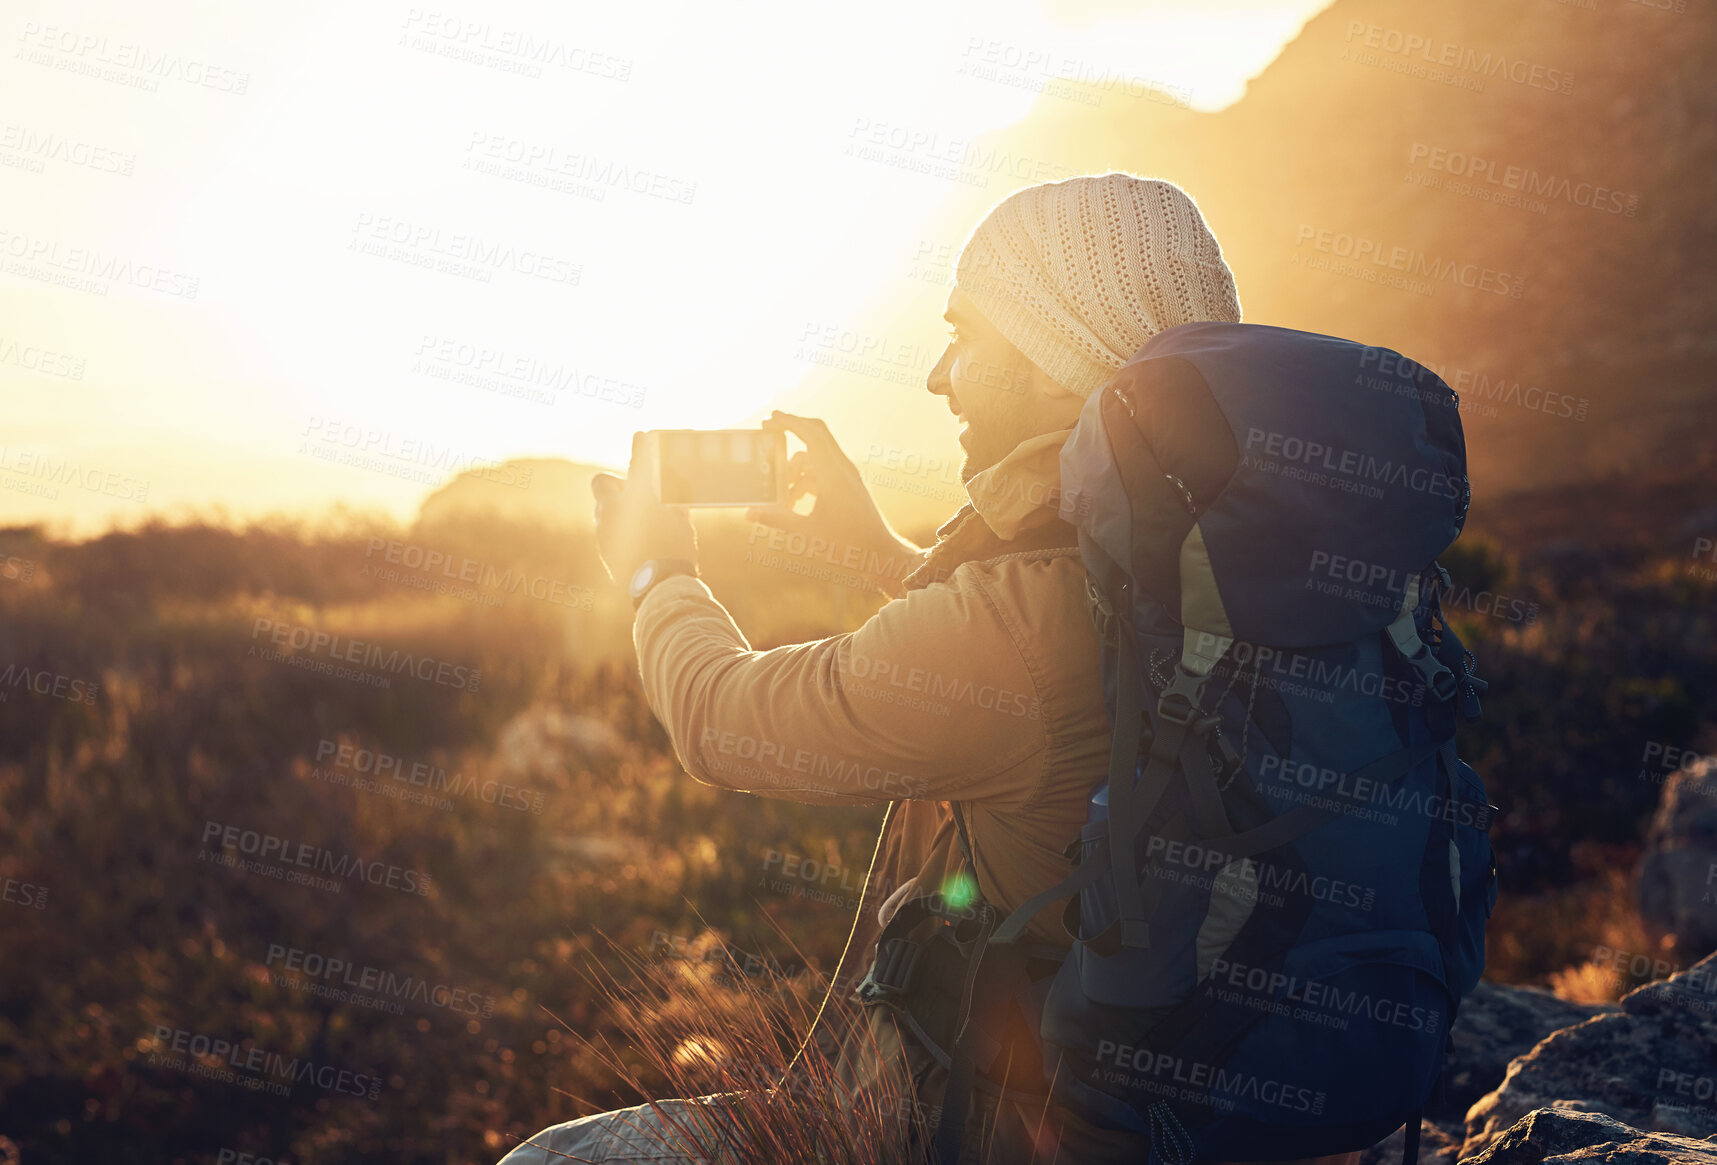 Buy stock photo Shot of a hiker on top of a mountain capturing pictures of the view